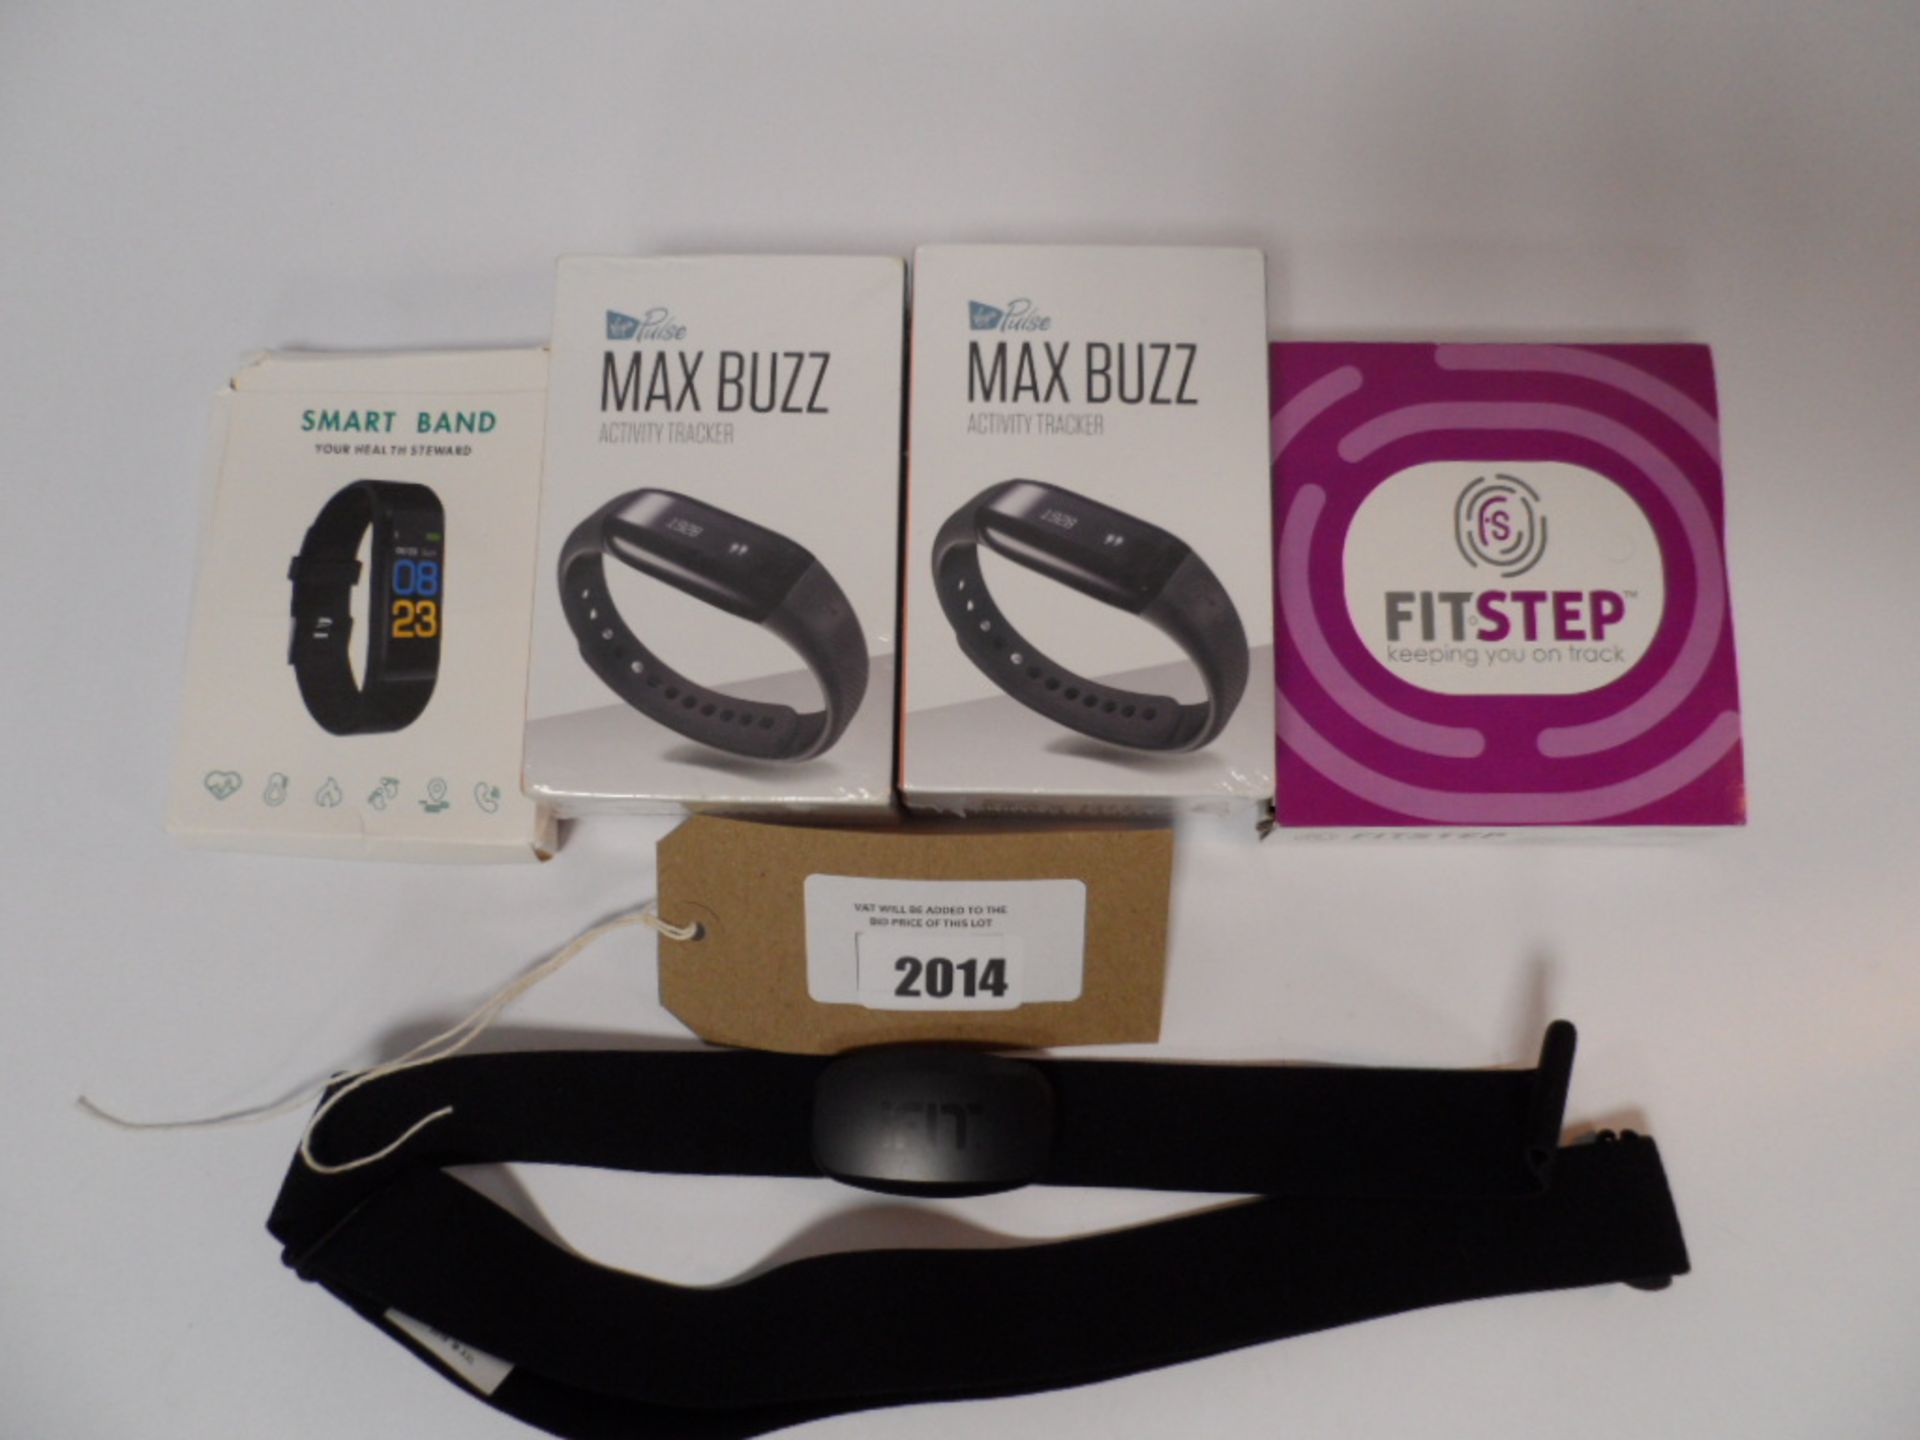 Max Buzz, Smart band, Fit step, fitness tracking devices.